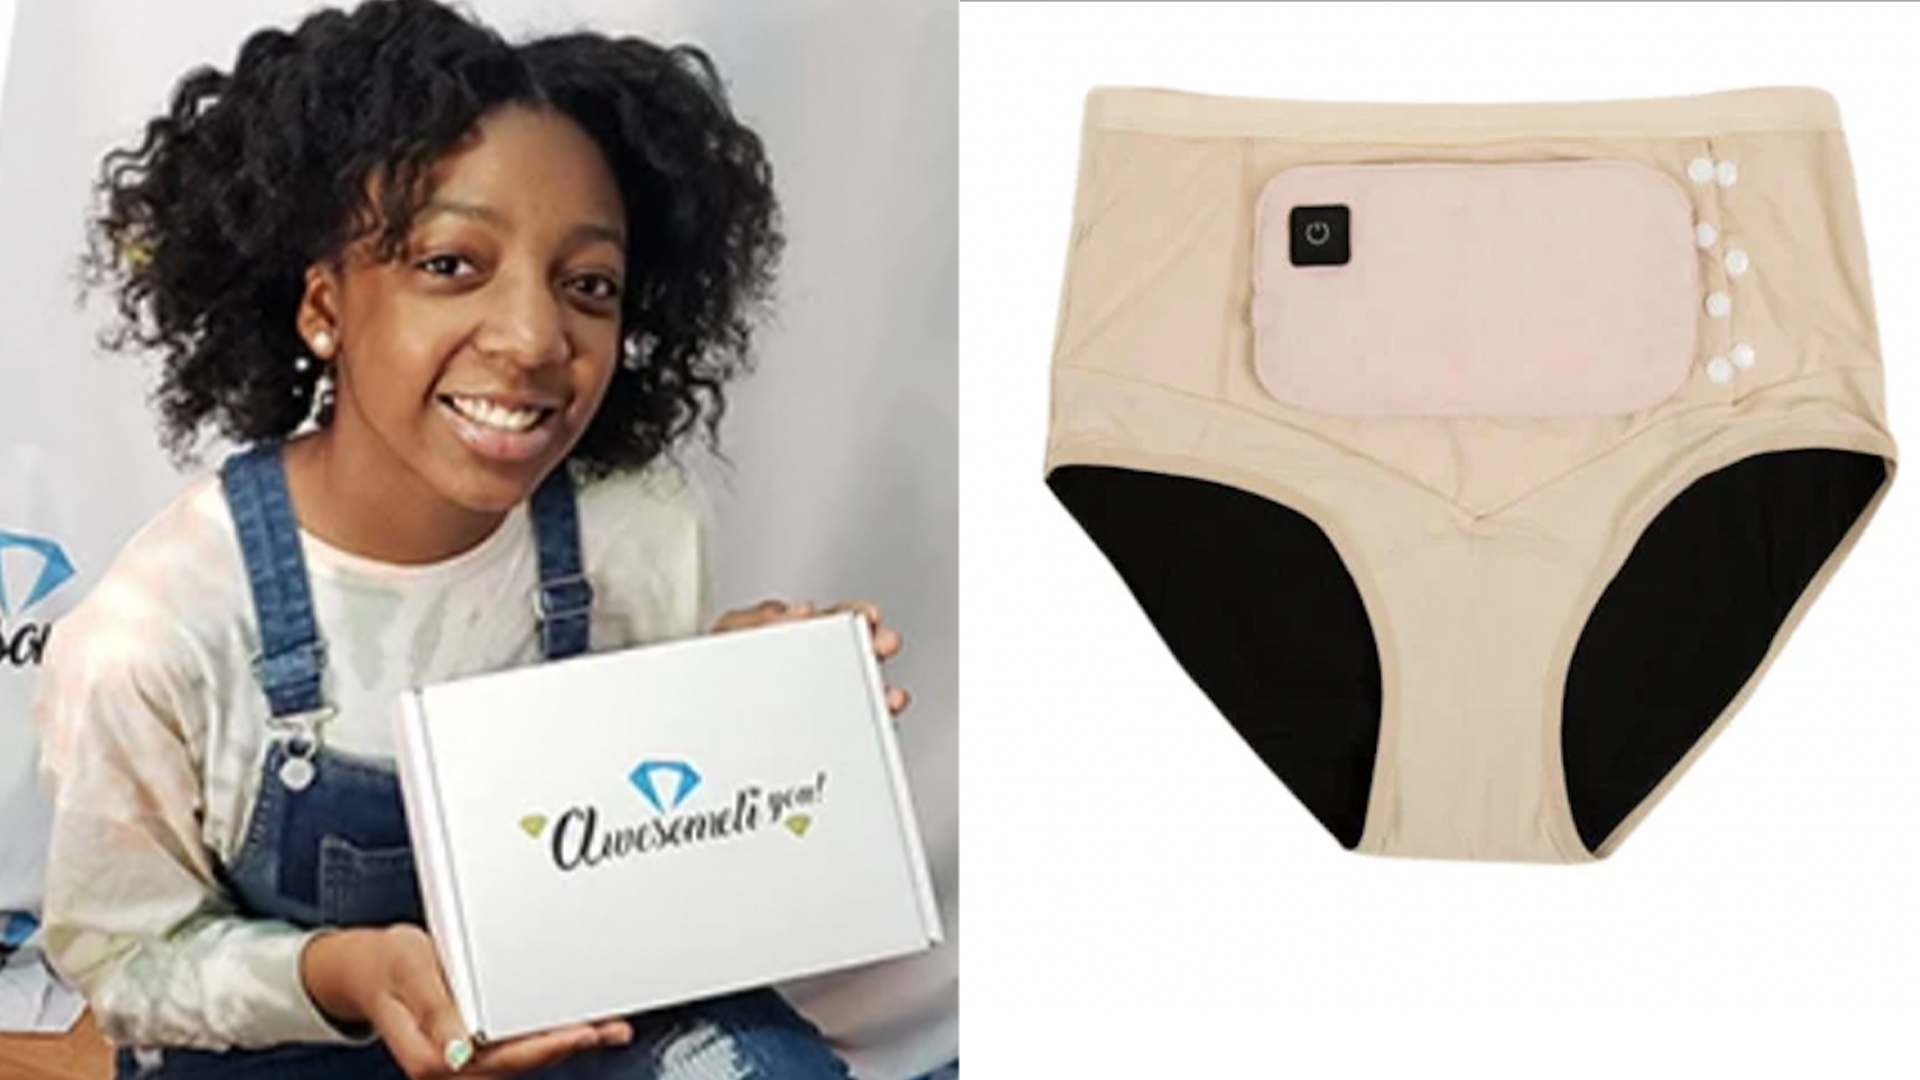 13-Year-Old Creates Period Panty With Heating Pad After Experiencing  Discomfort During Her Menstrual Cycle - AfroTech